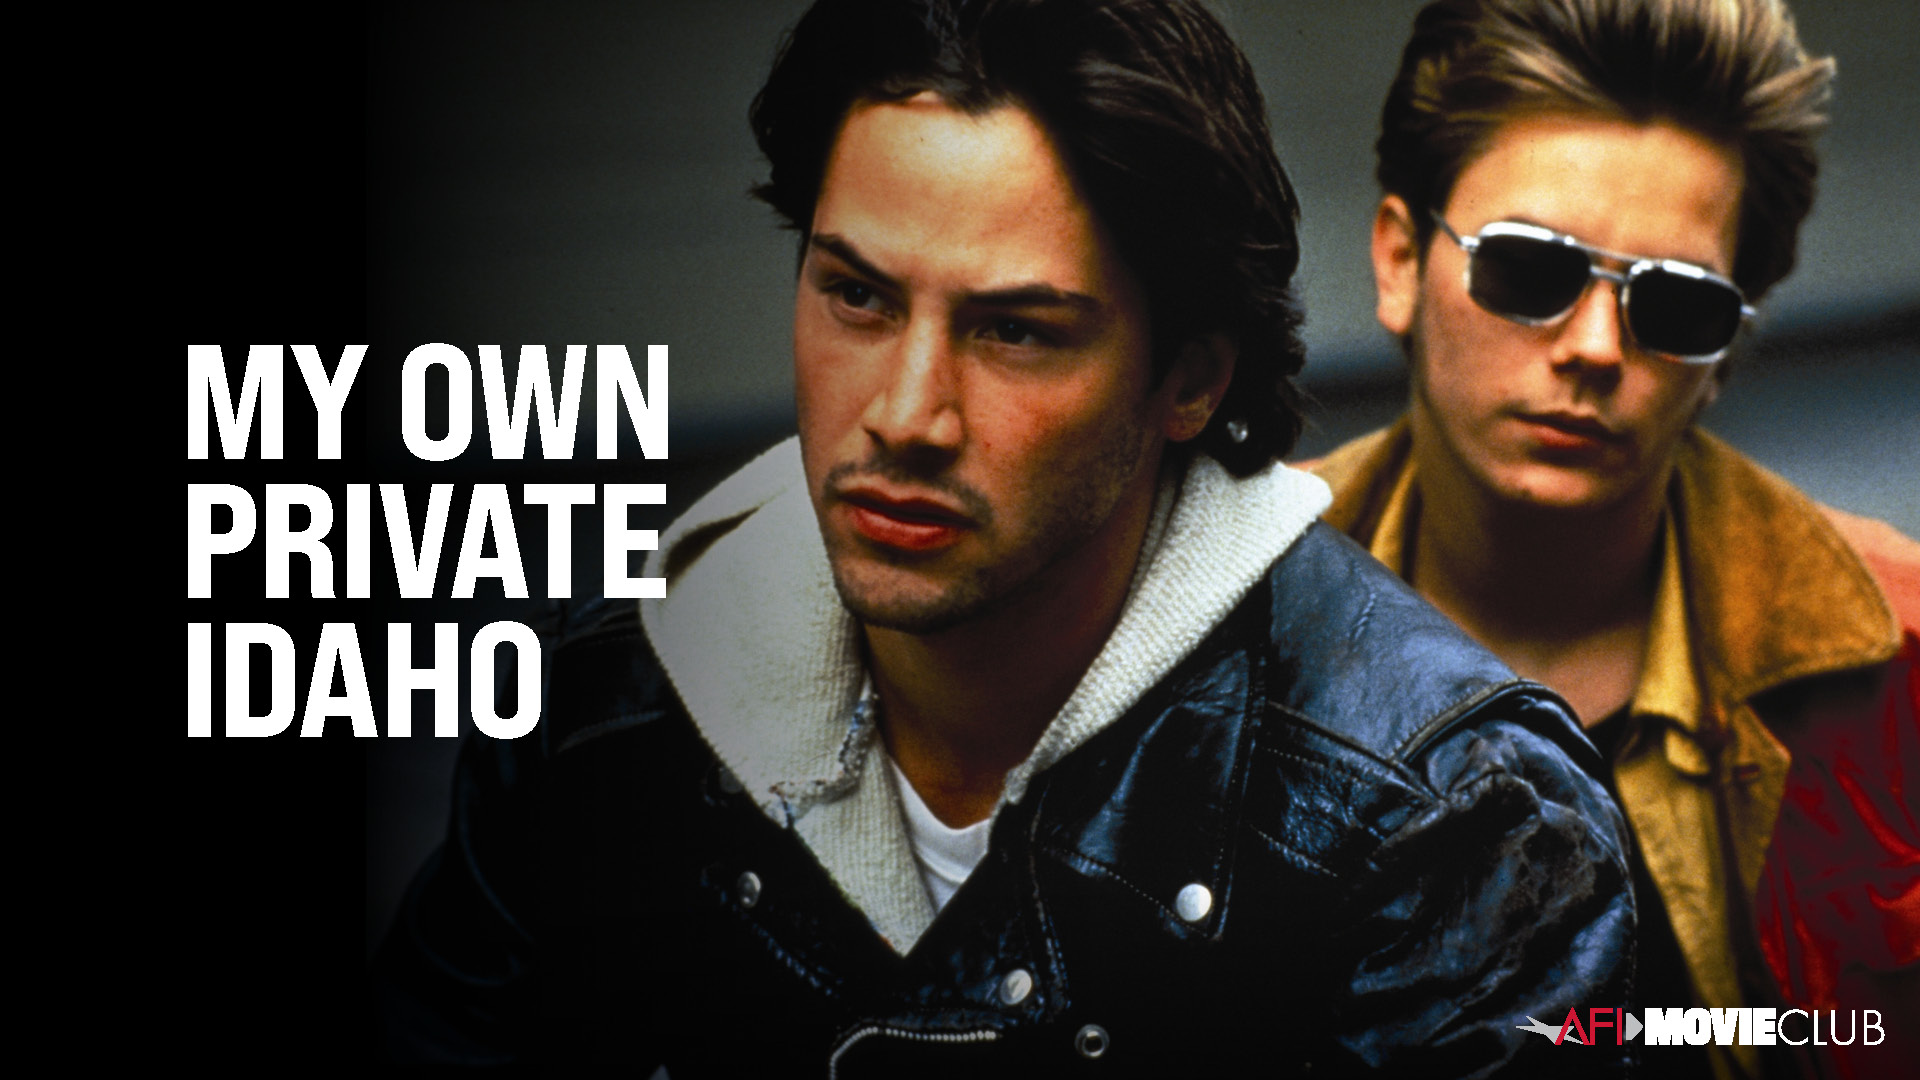 My Own Private Idaho Film Still - River Phoenix and Keanu Reeves